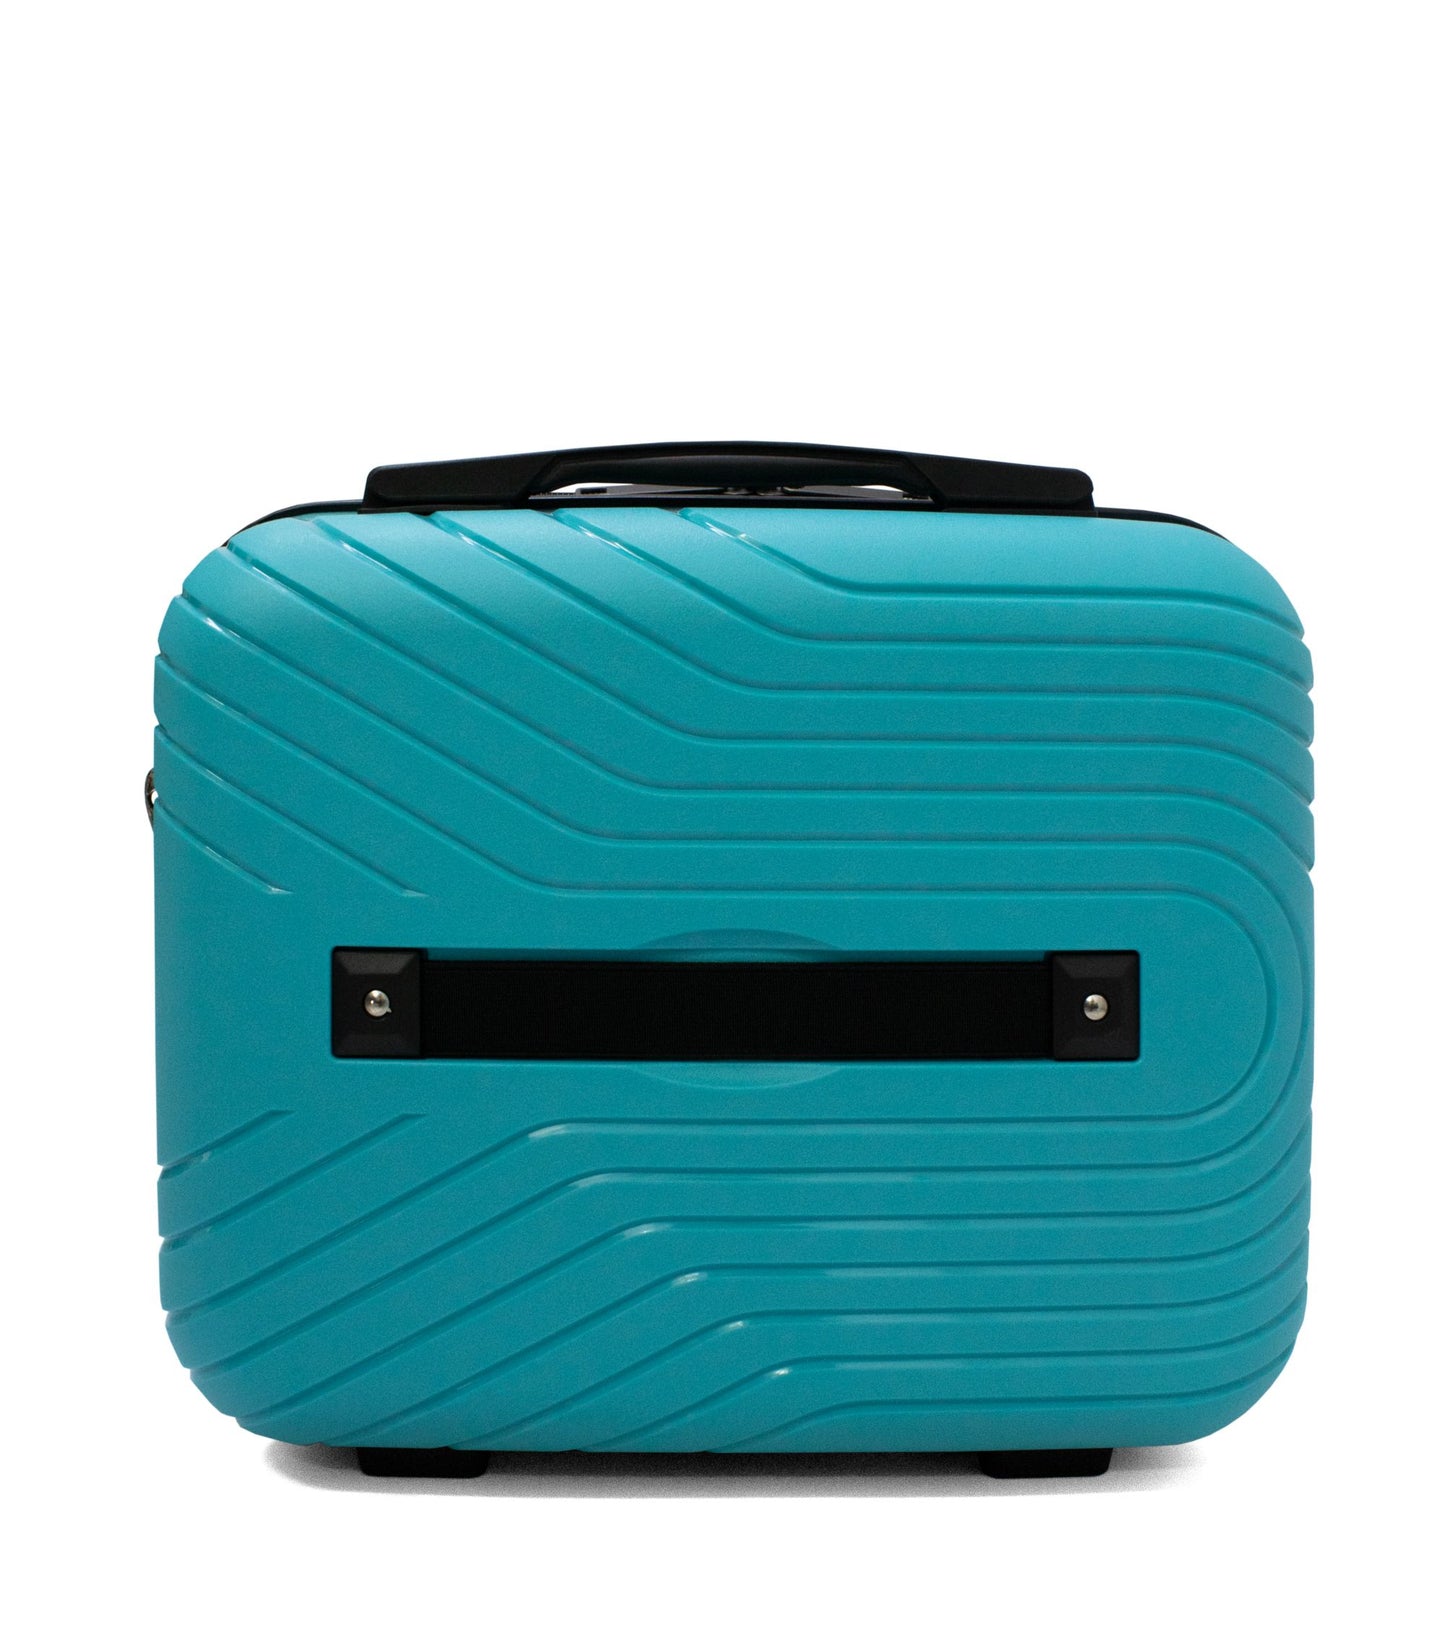 Cavalinho Colorful Hardside Toiletry Tote (15") - 15 inch DarkTurquoise - 68020004.25.15_3